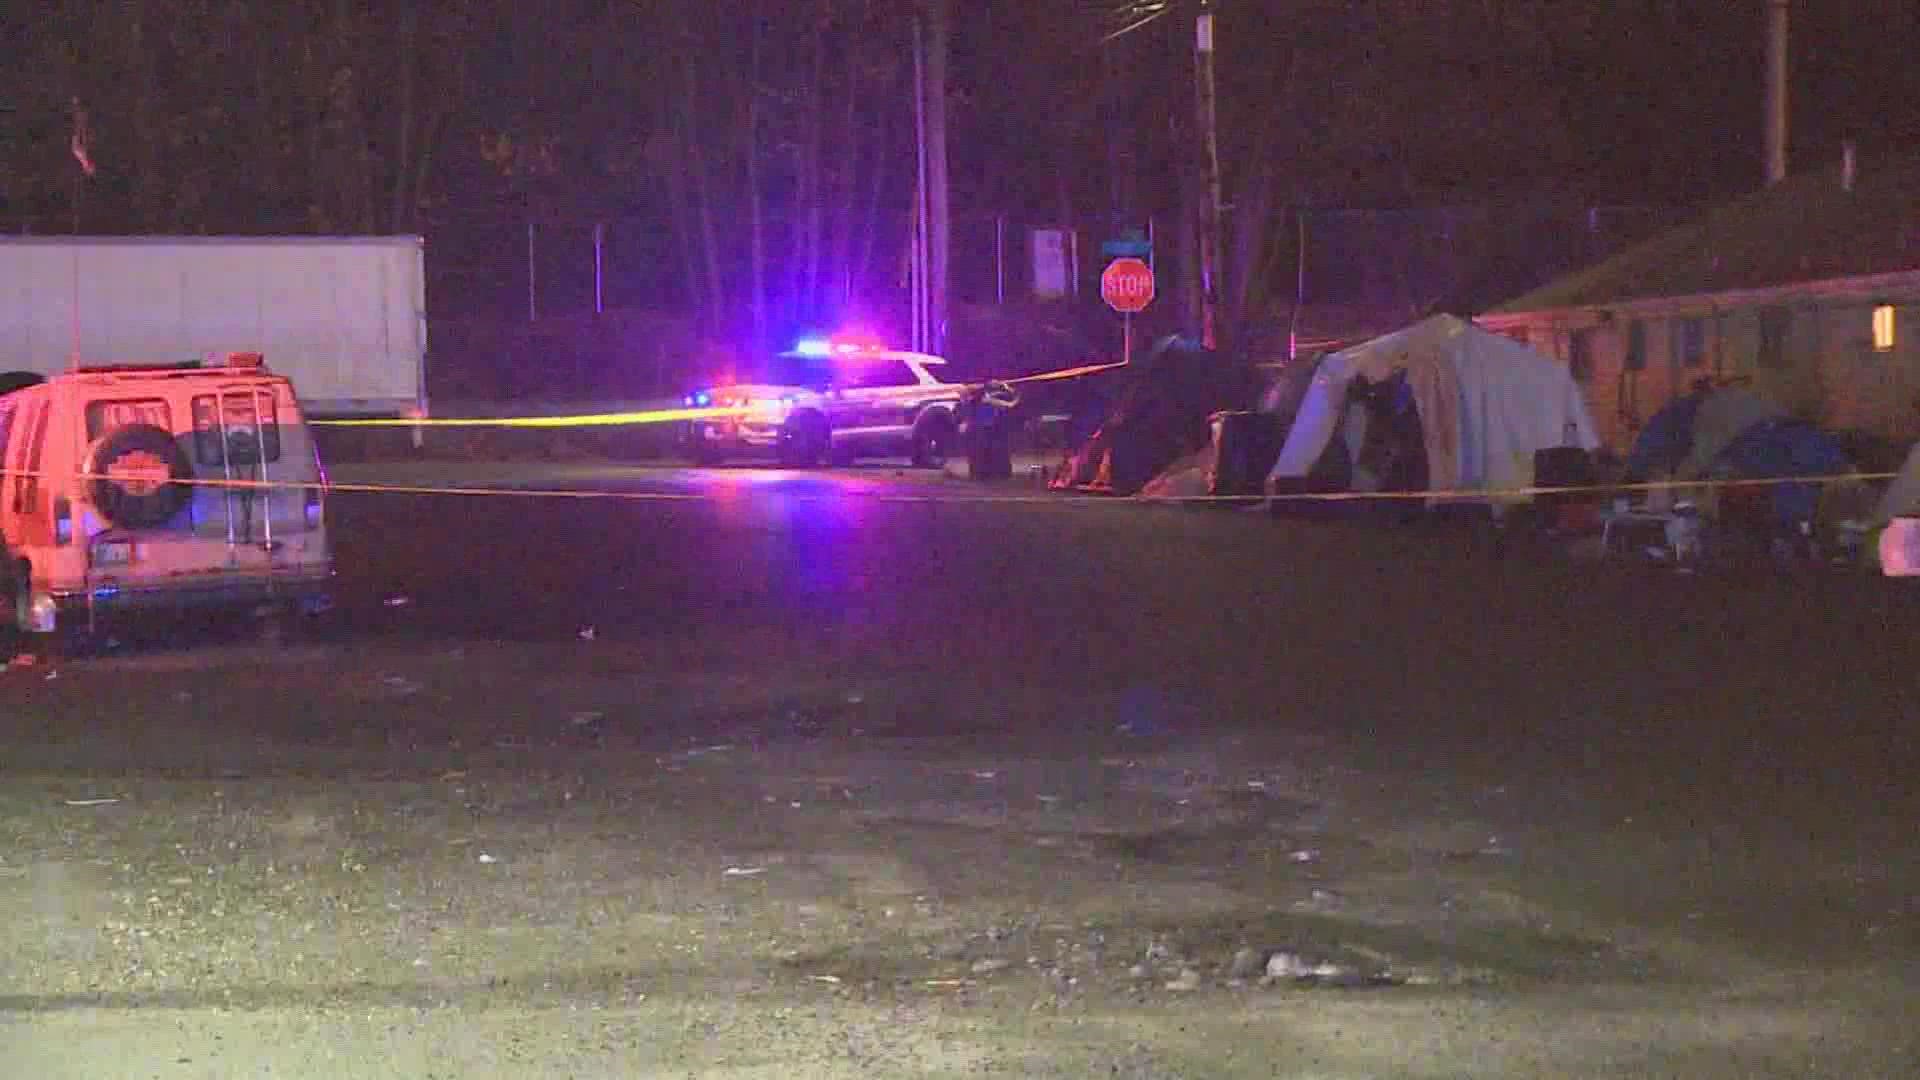 A man was found shot Monday night near East M St. and Puyallup Ave. in Tacoma. He later died of his wounds. This is the third shooting death in Tacoma in 24 hours.